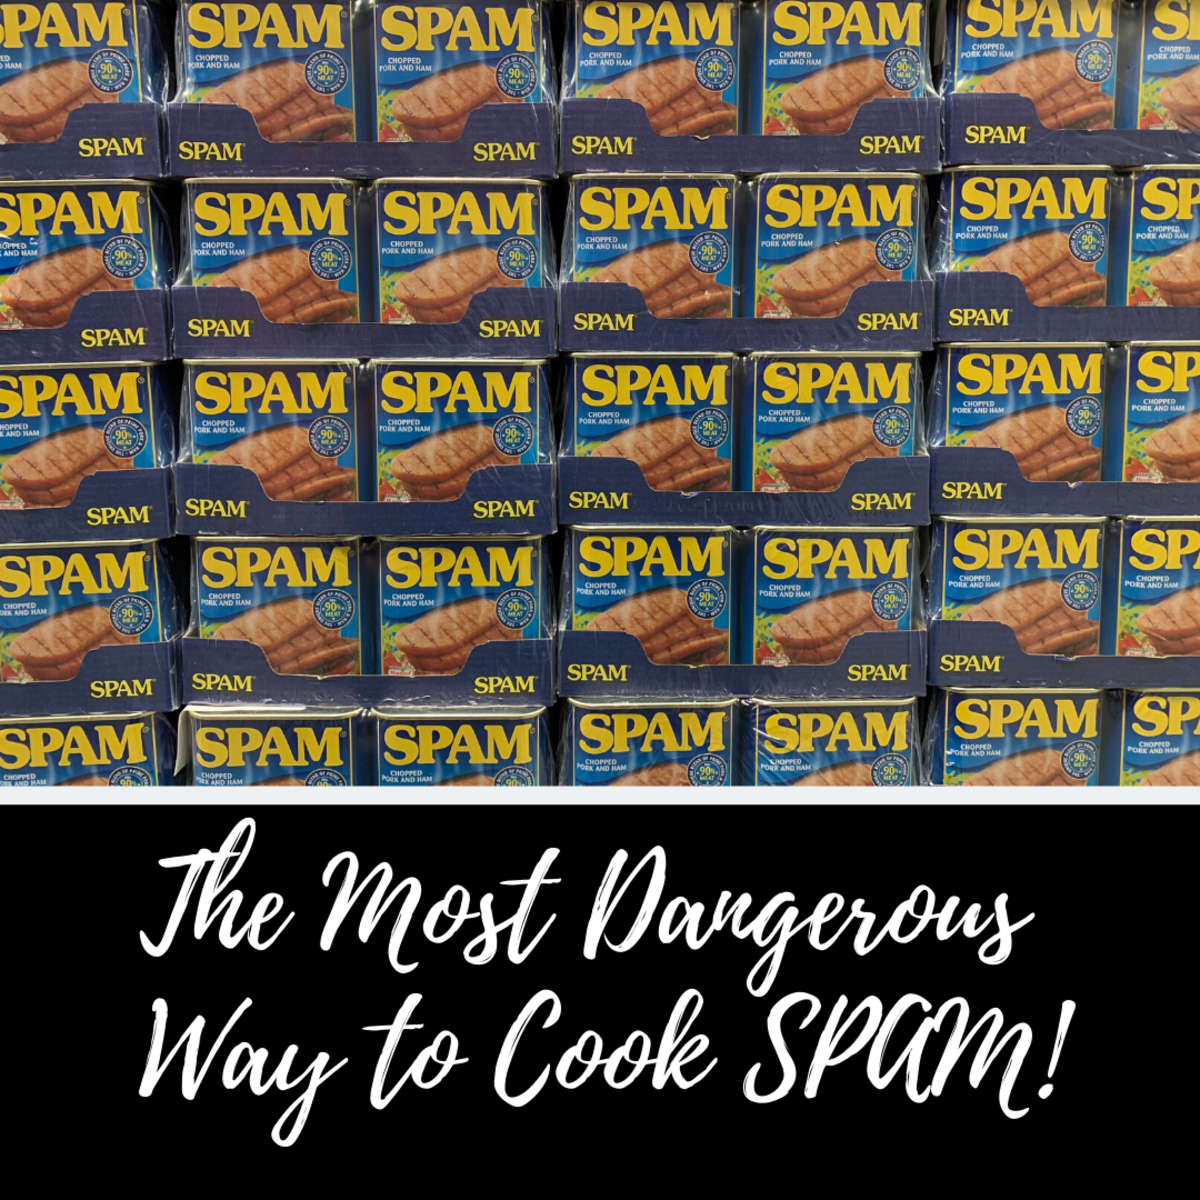 The Most Dangerous Way to Cook SPAM